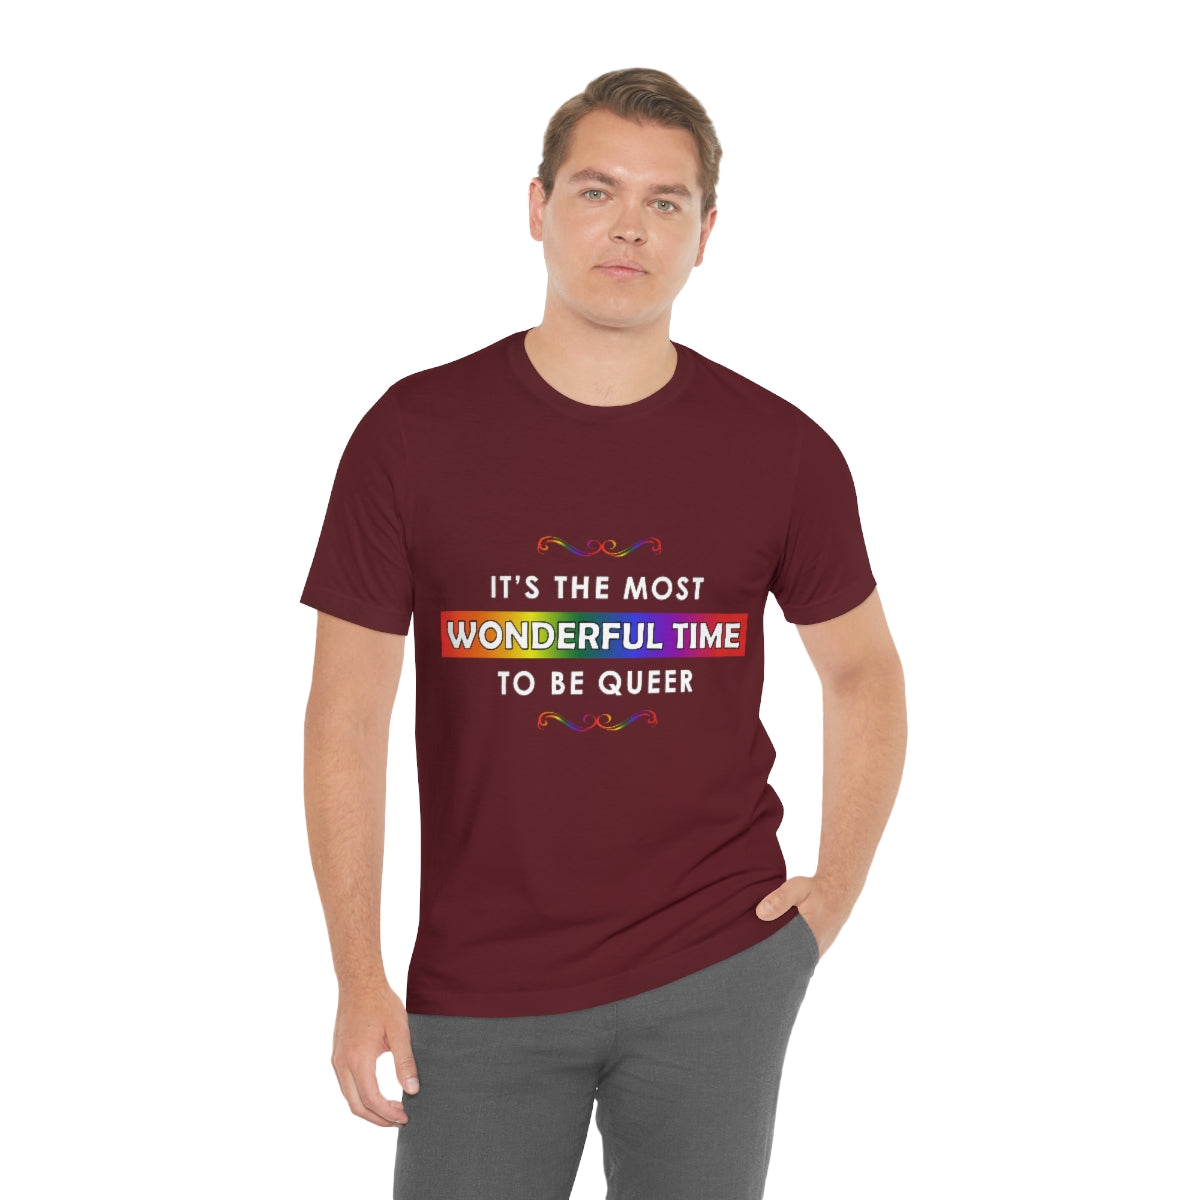 Classic Unisex Christmas LGBTQ T-Shirt - It’s The Most Wonderful Time To Be Queer! Printify